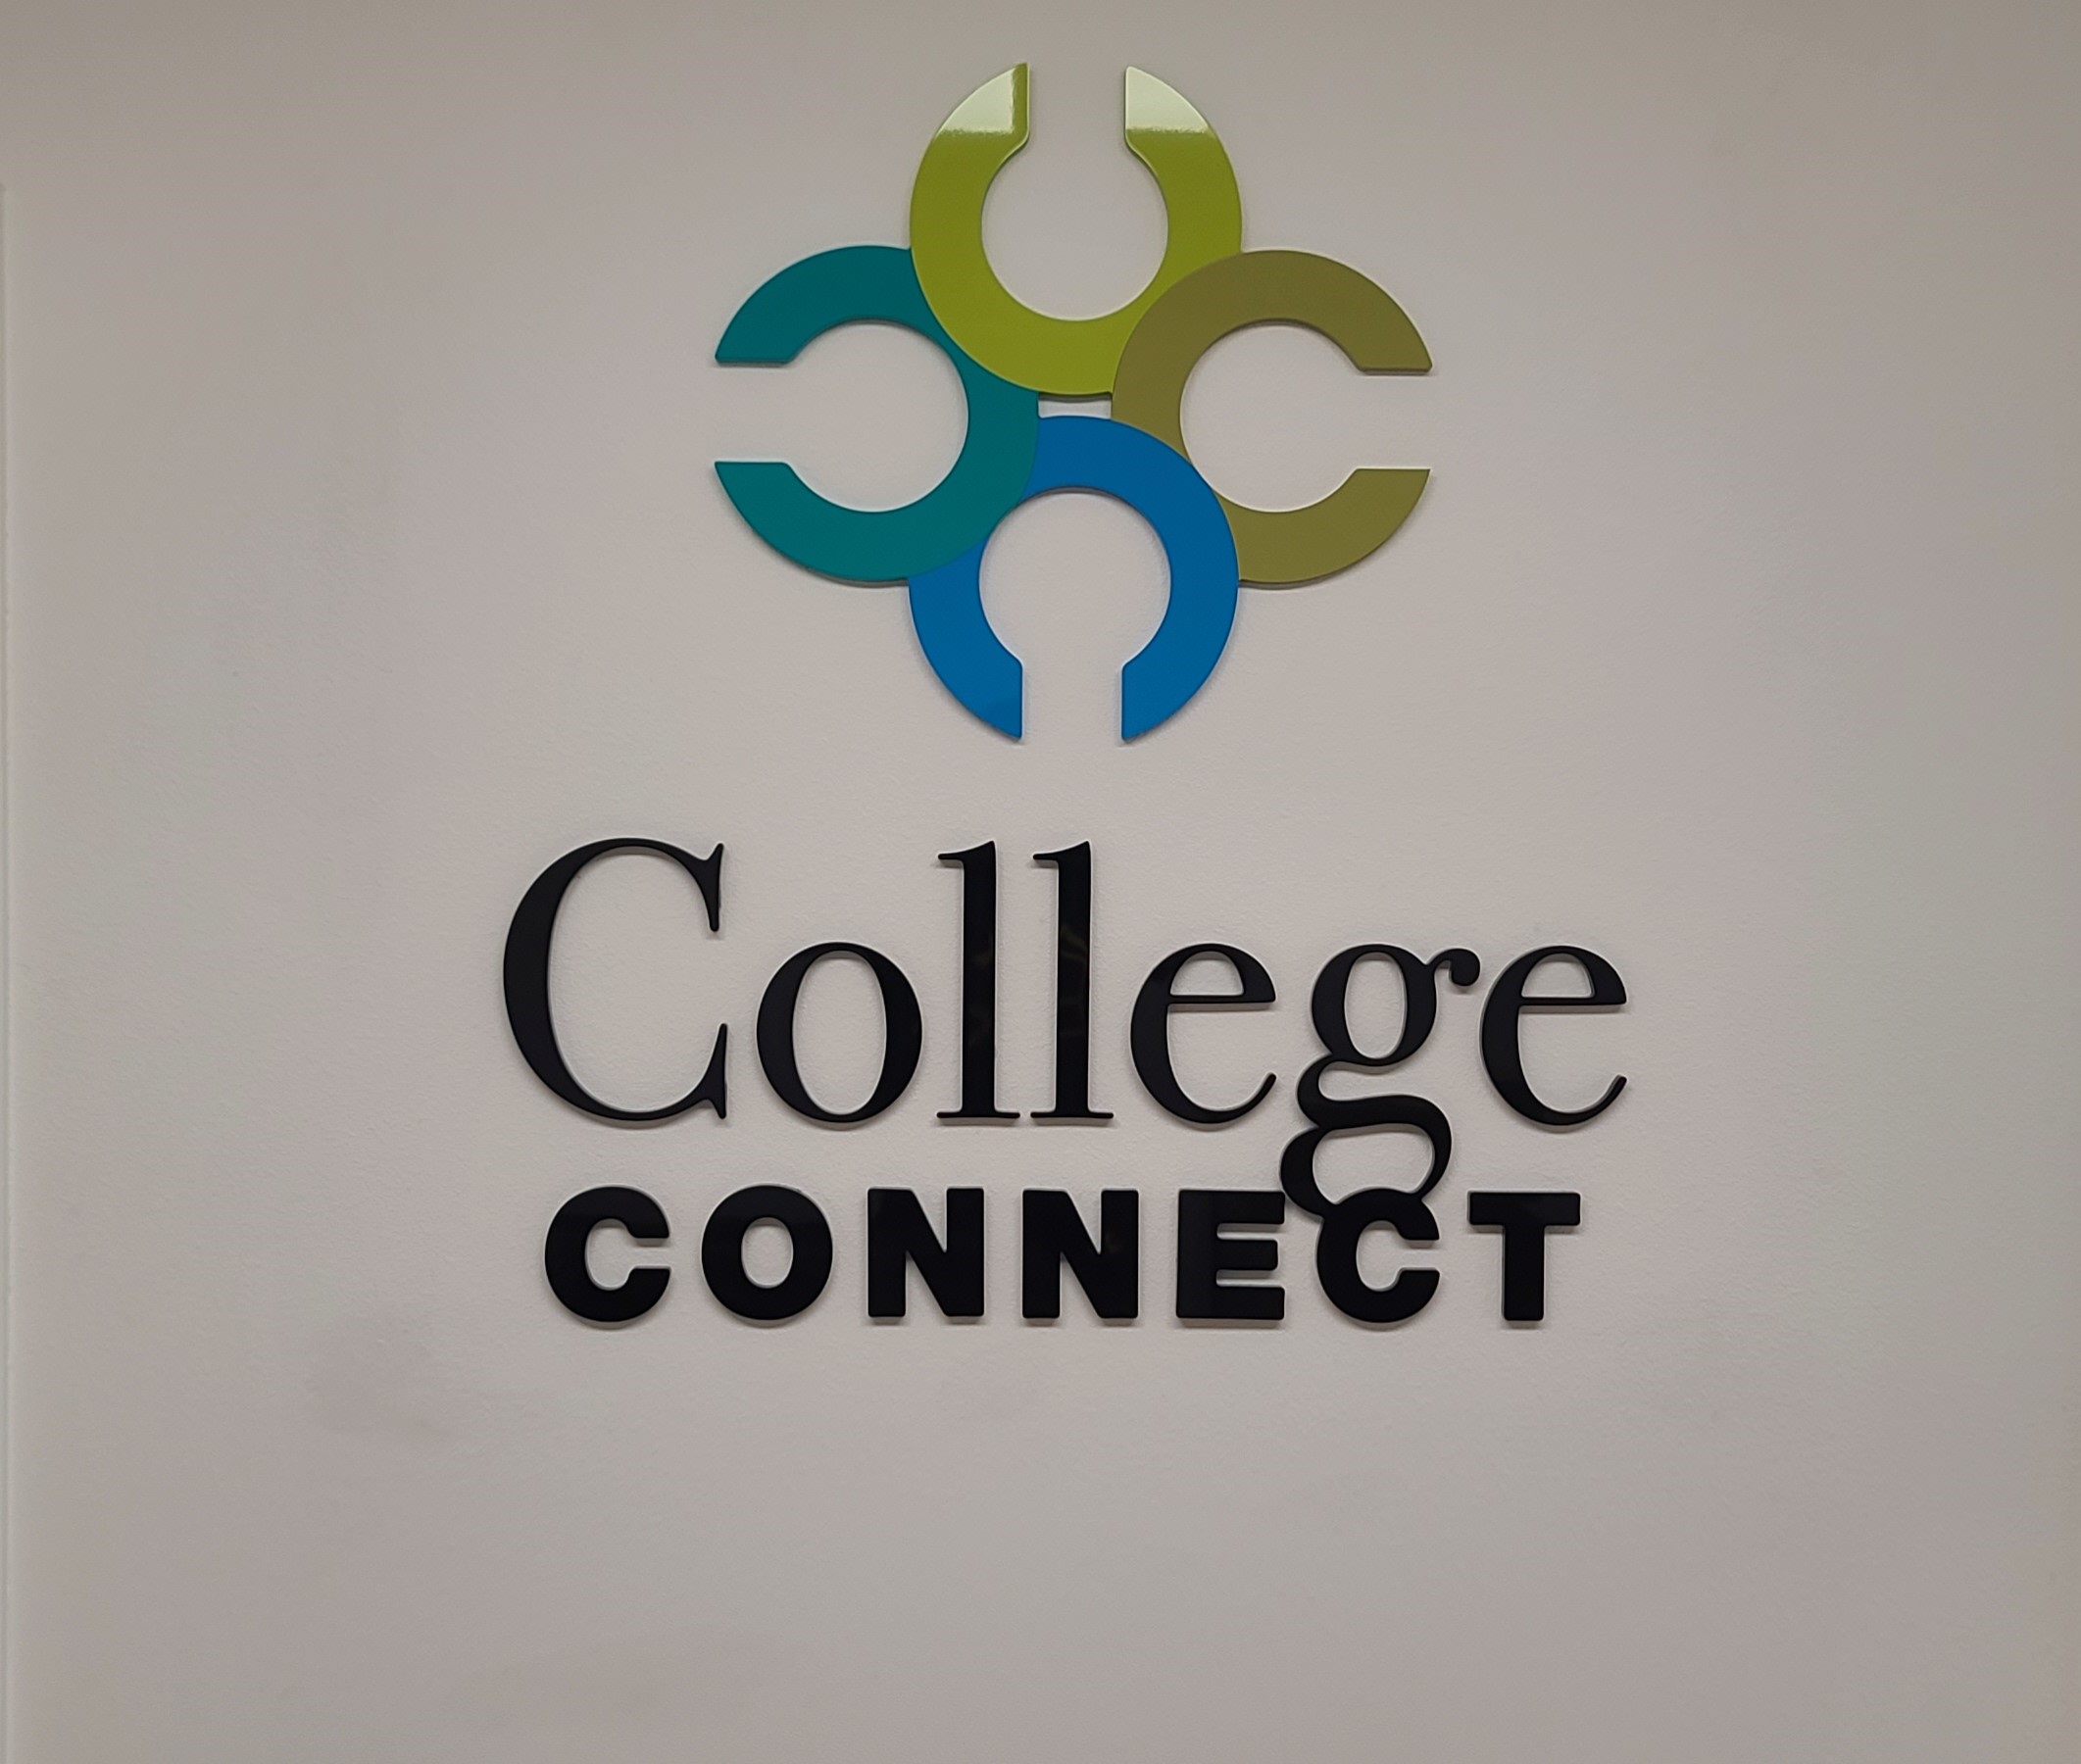 You are currently viewing Acrylic Lobby Sign for College Connect in Thousand Oaks